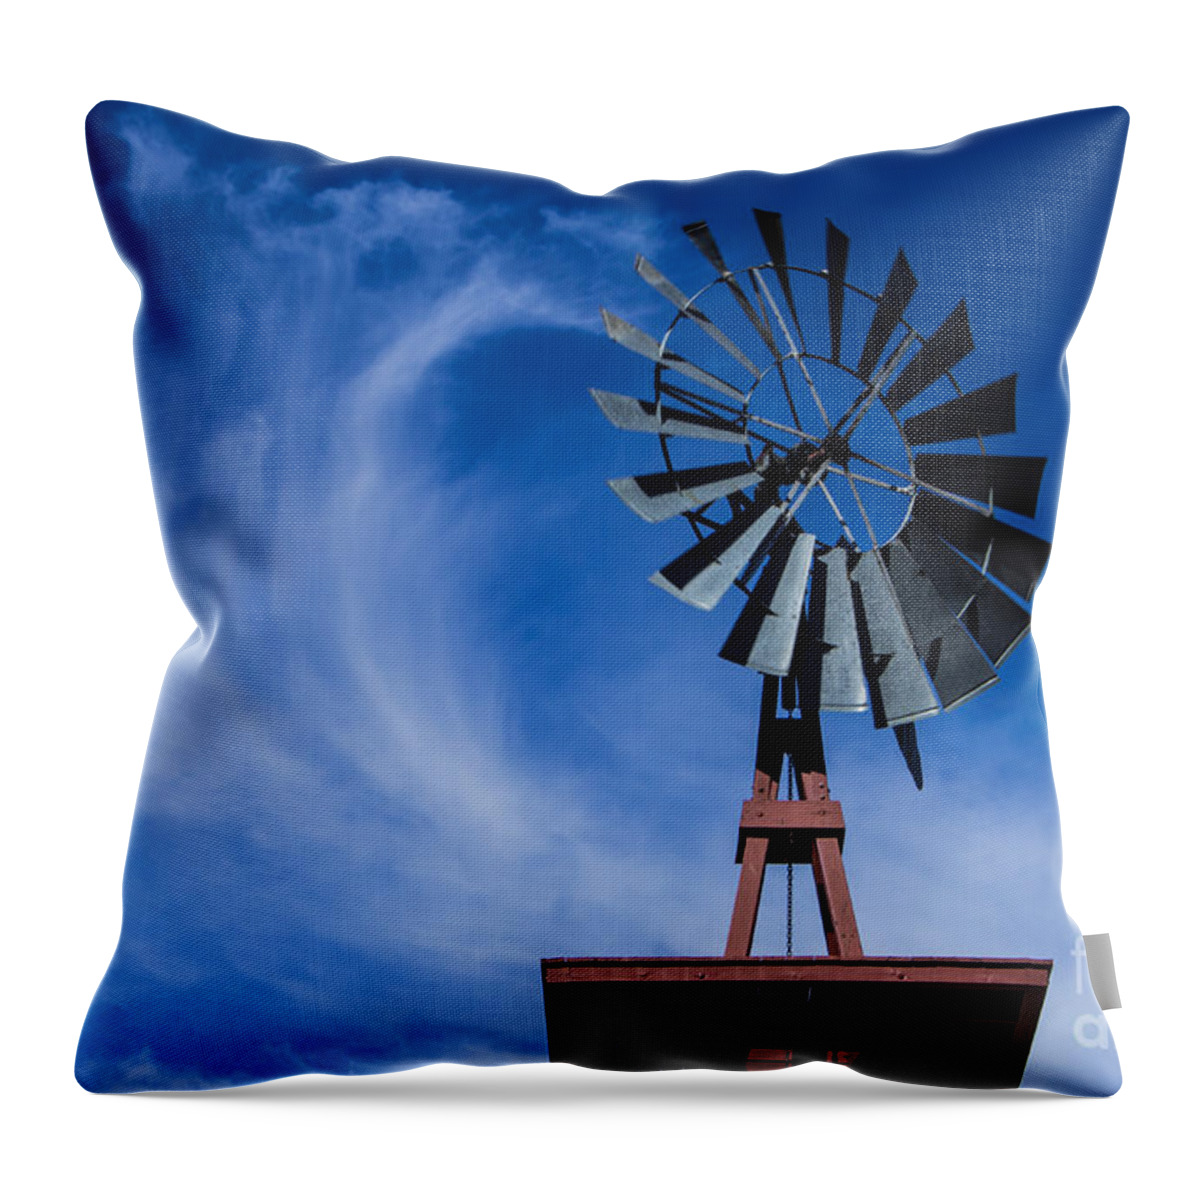 Clouds Throw Pillow featuring the photograph Whipping Up The Clouds by Steven Parker